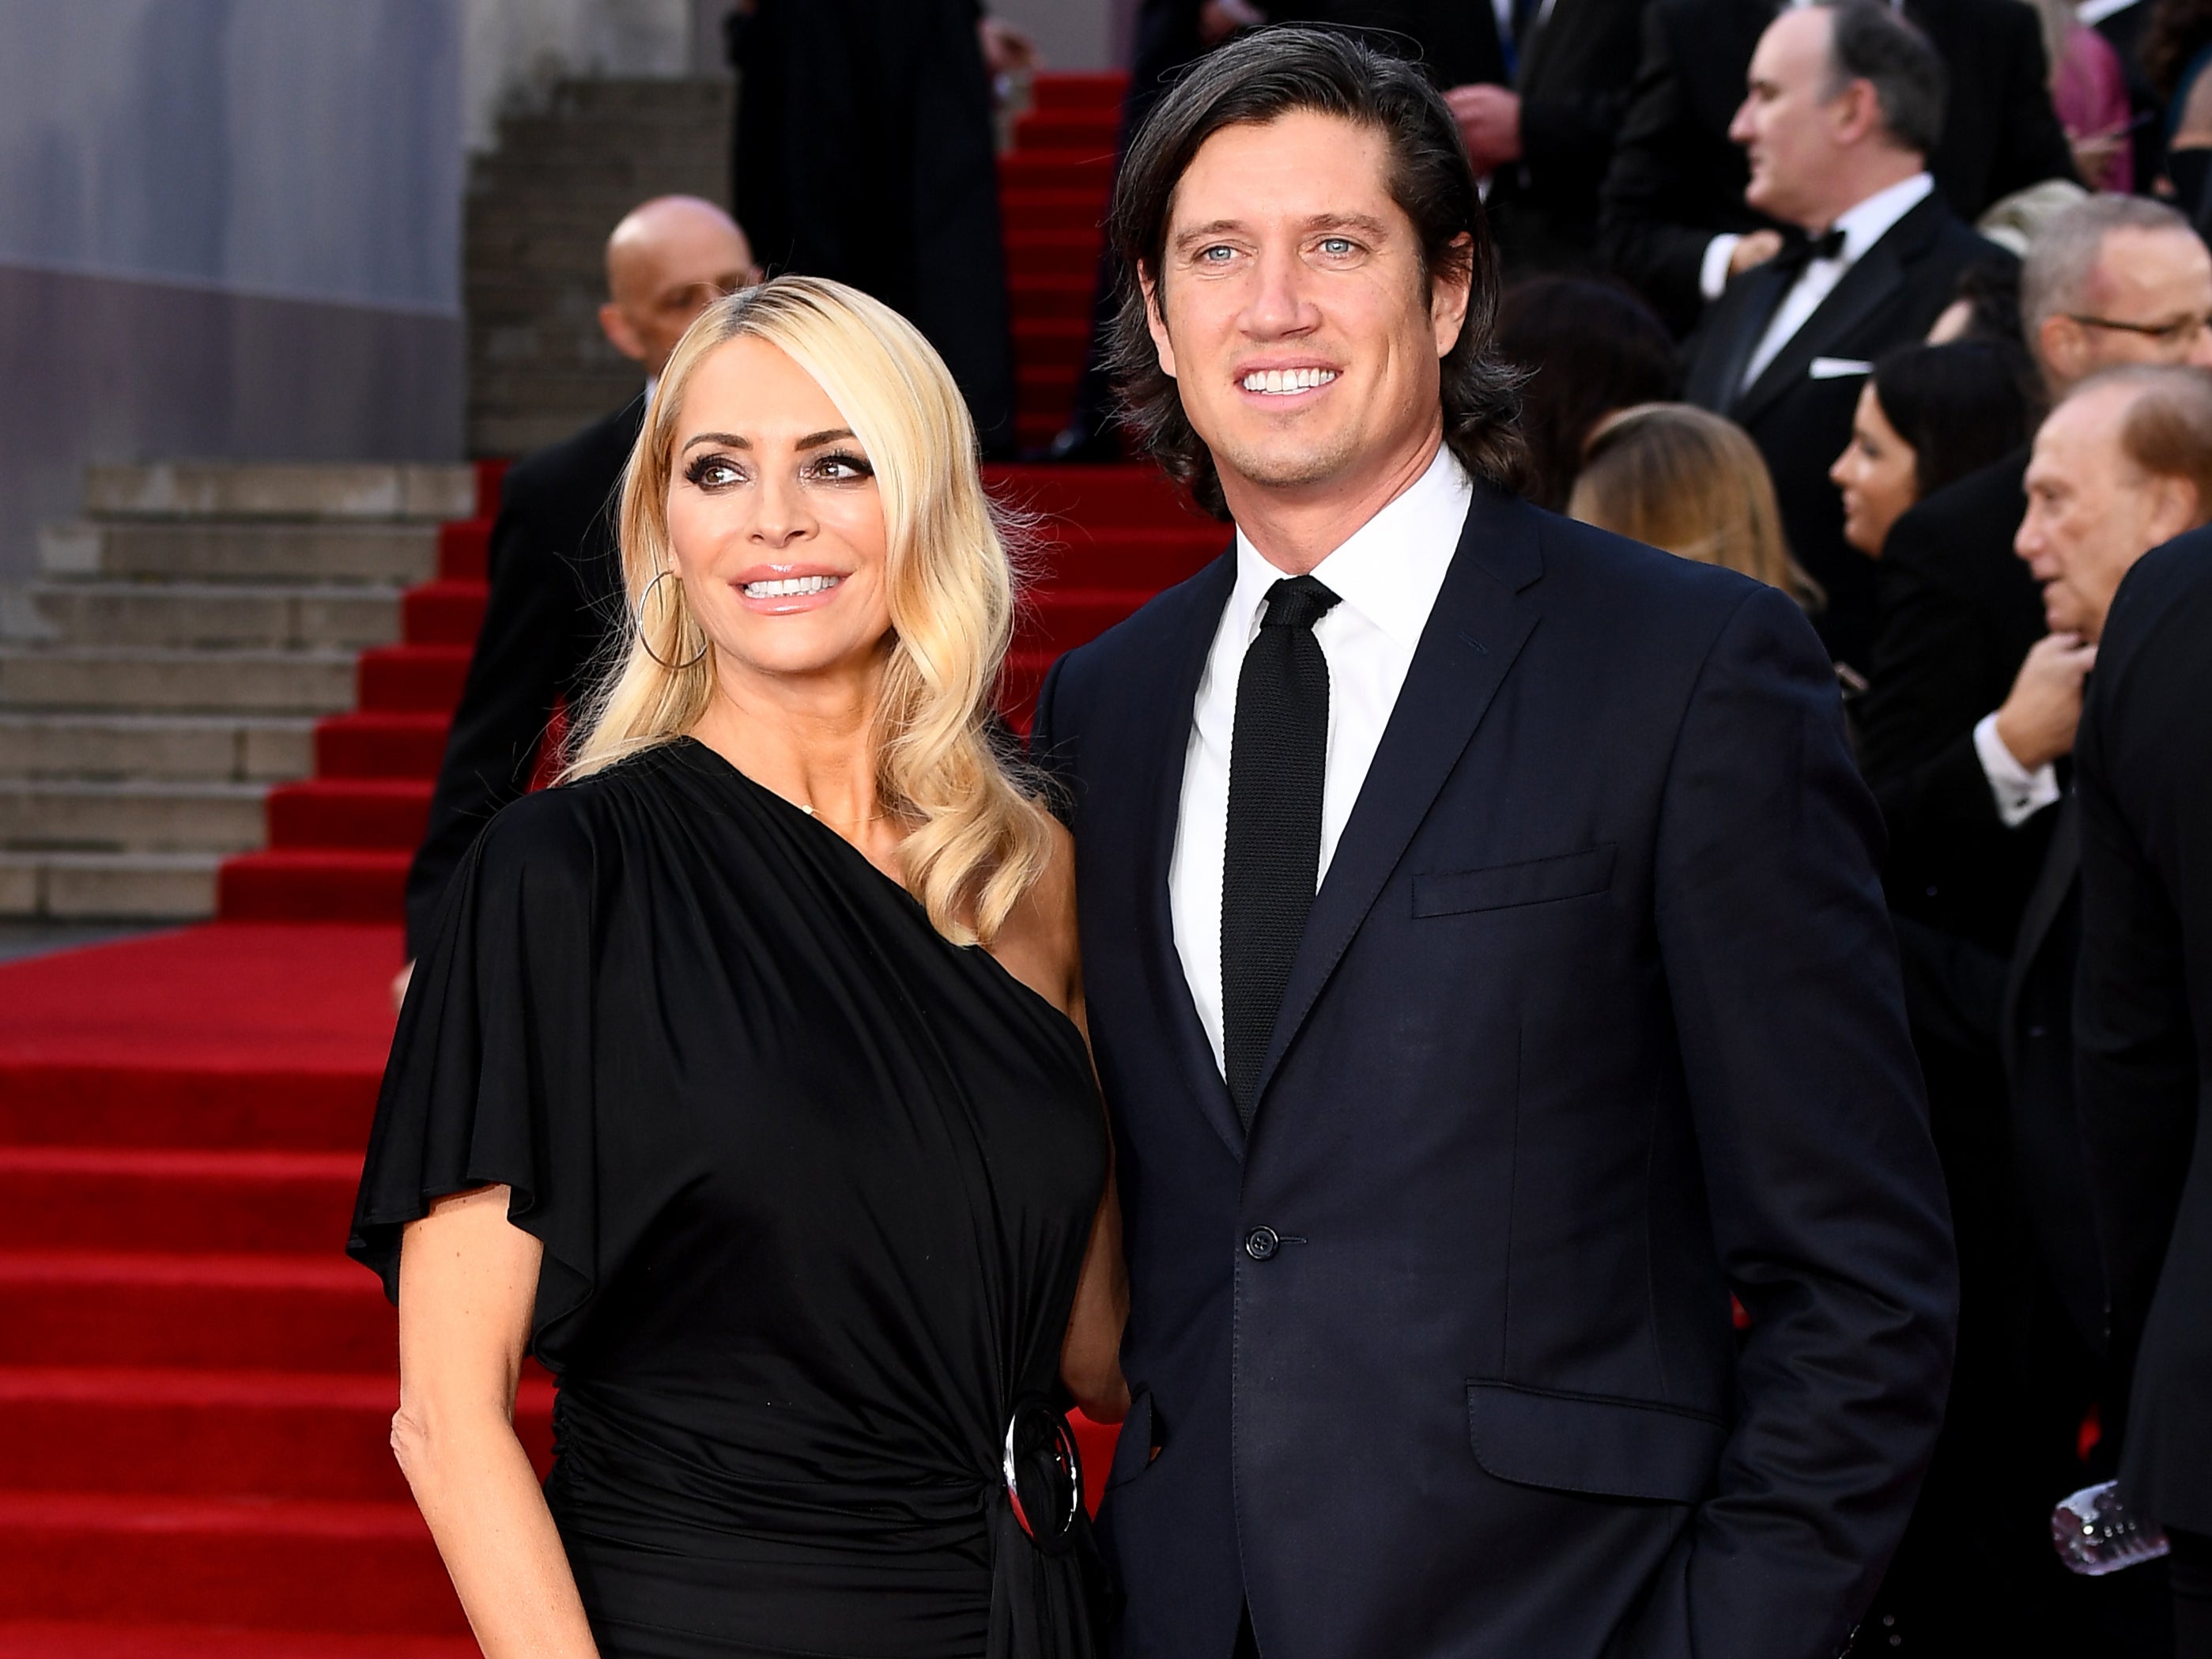 Tess Daly and Vernon Kay attend the World Premiere of "NO TIME TO DIE" at the Royal Albert Hall on September 28, 2021